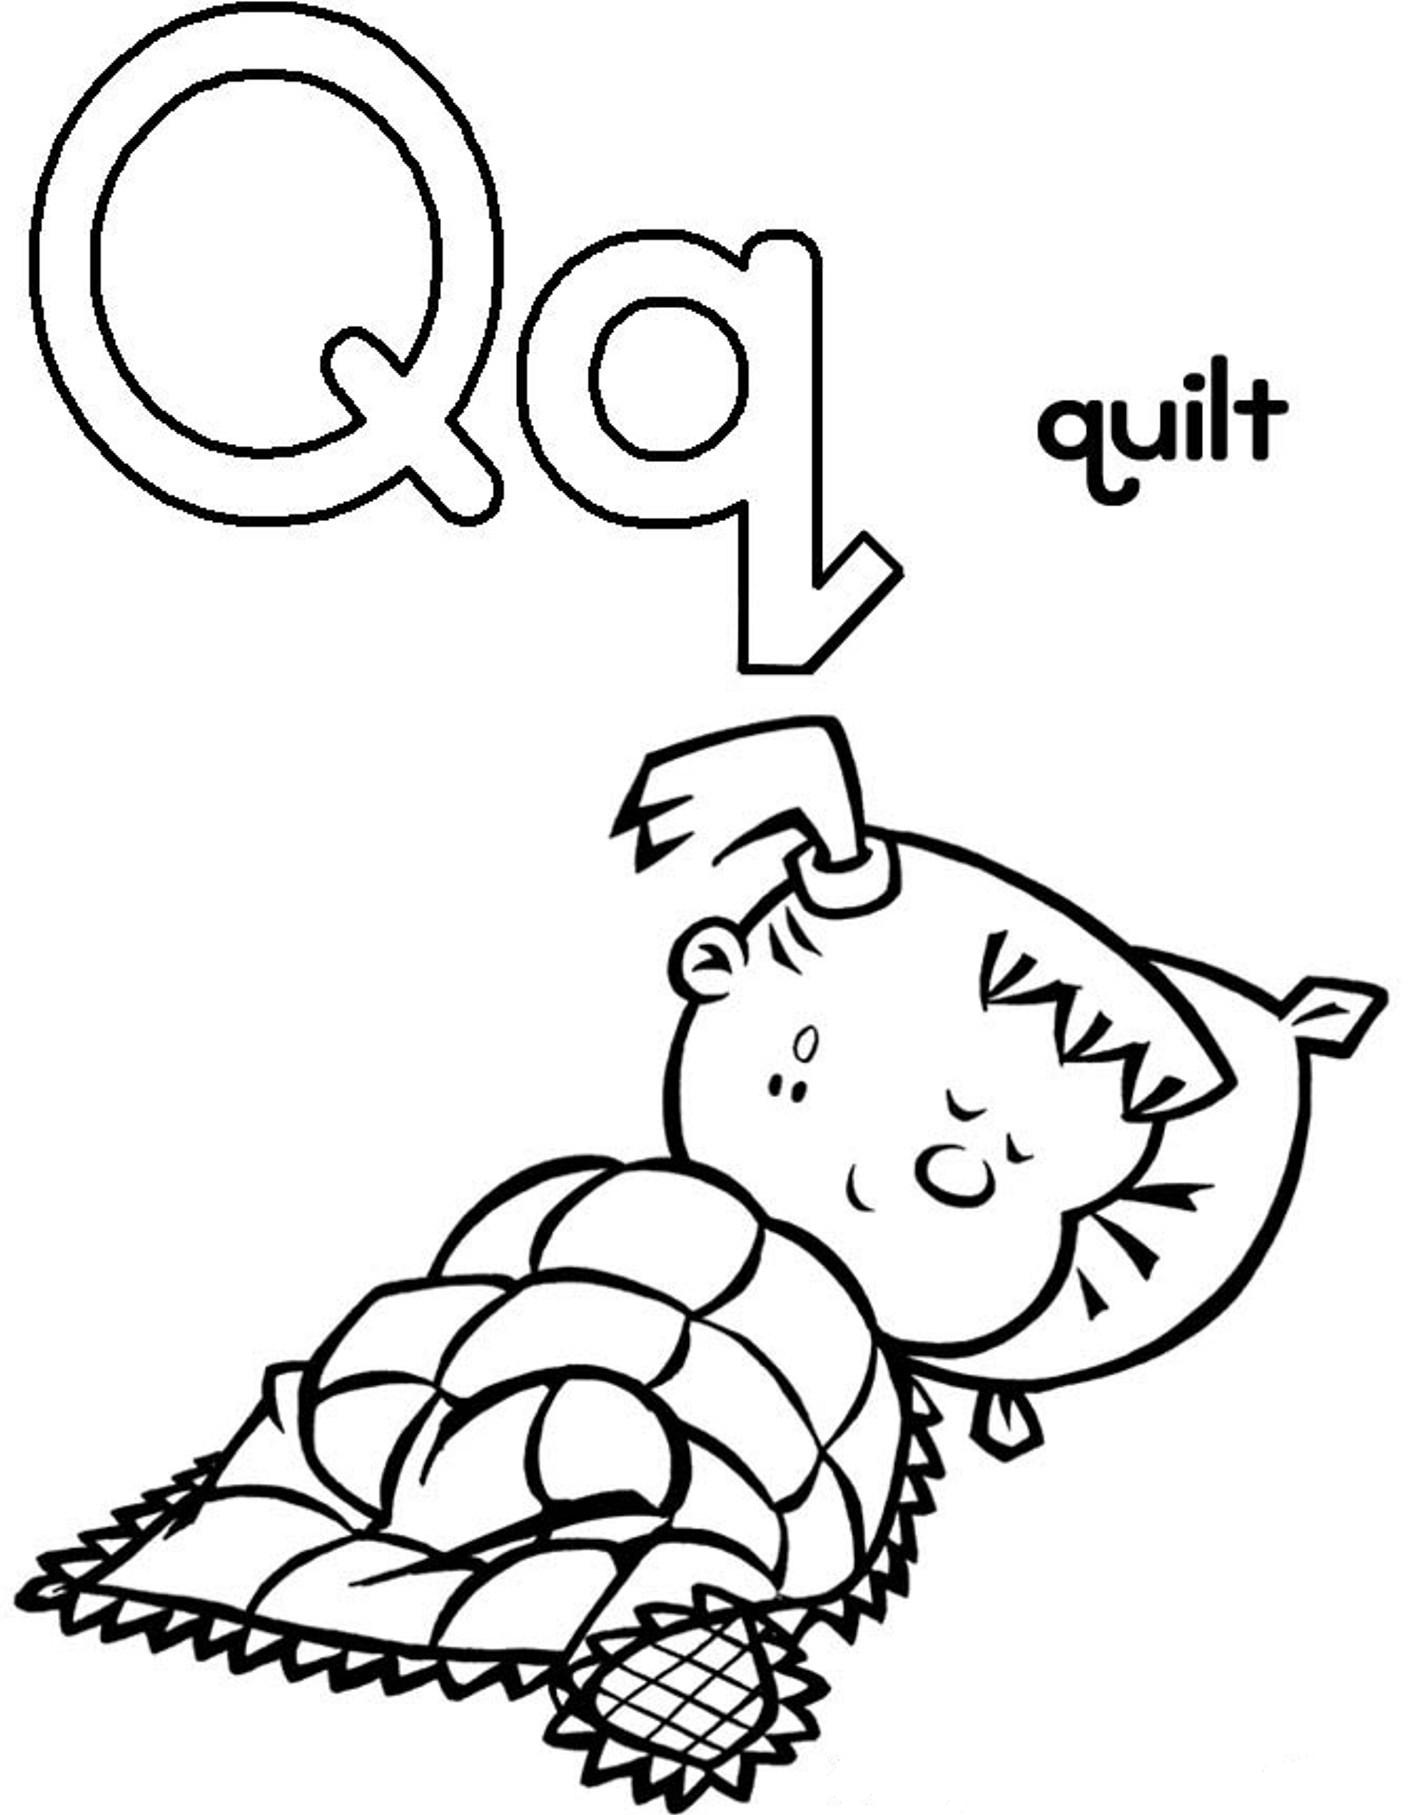 quilt coloring pages free - photo #42